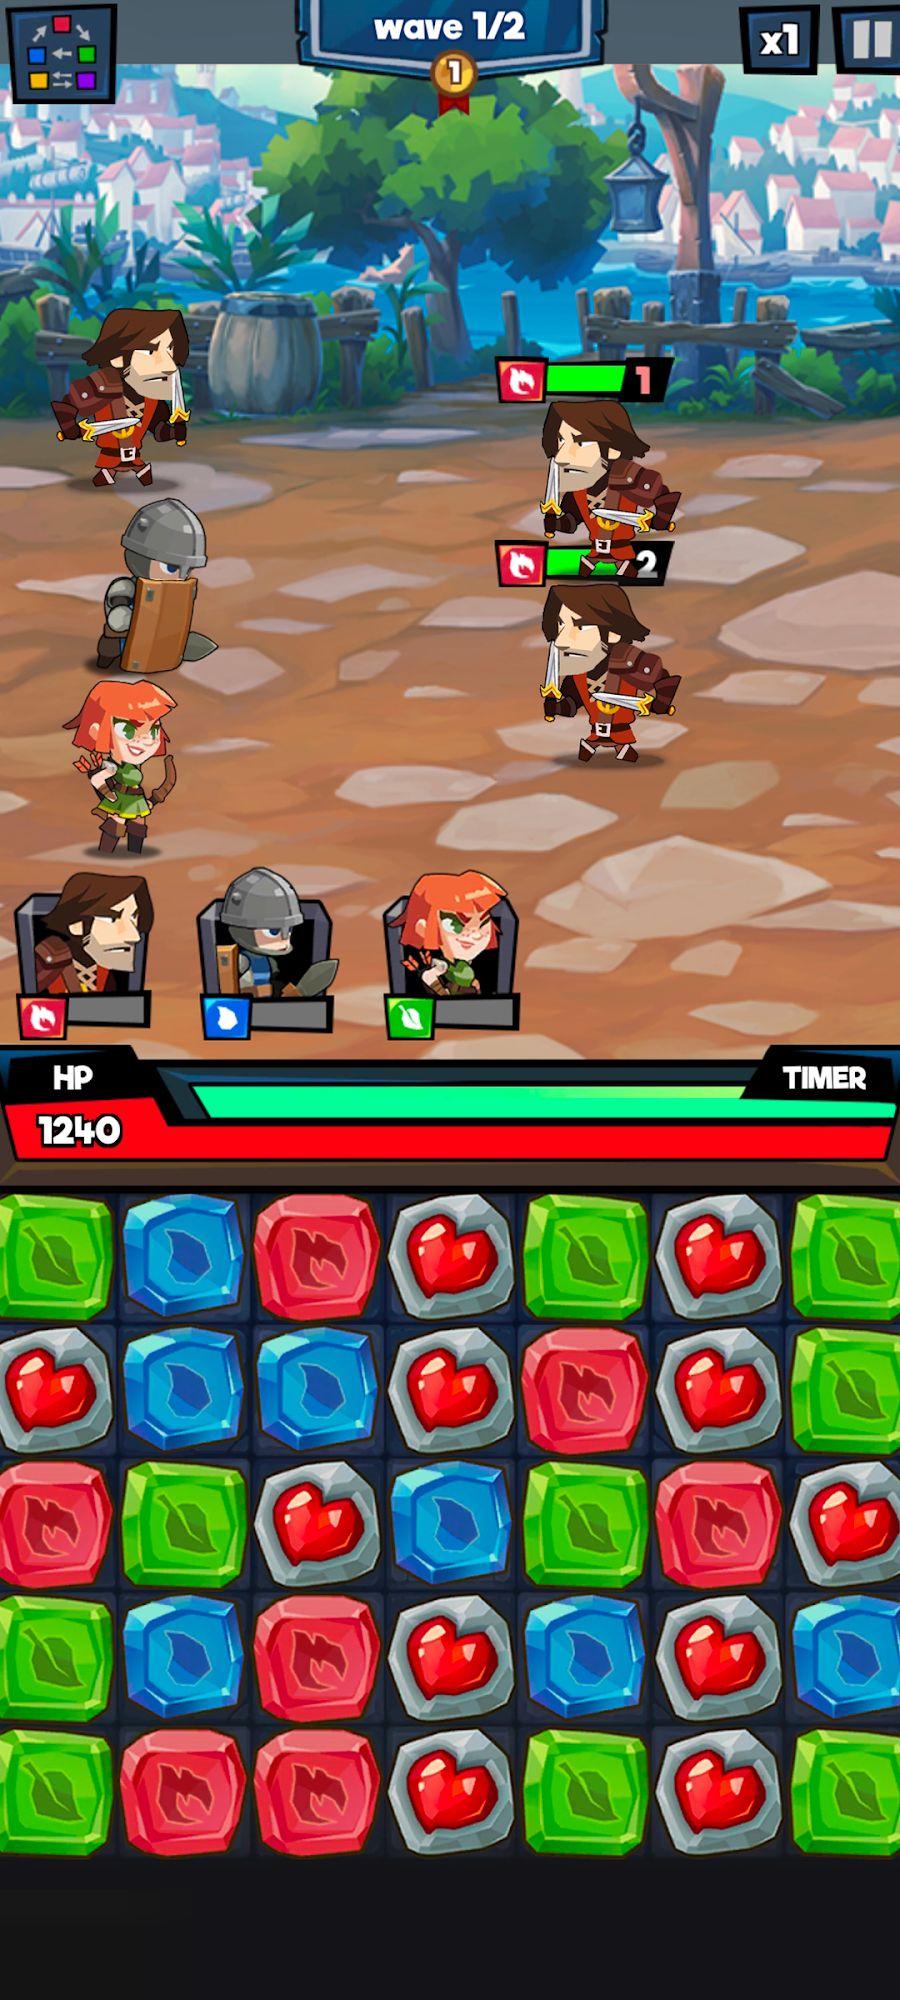 Gameplay of the Empire Knight for Android phone or tablet.